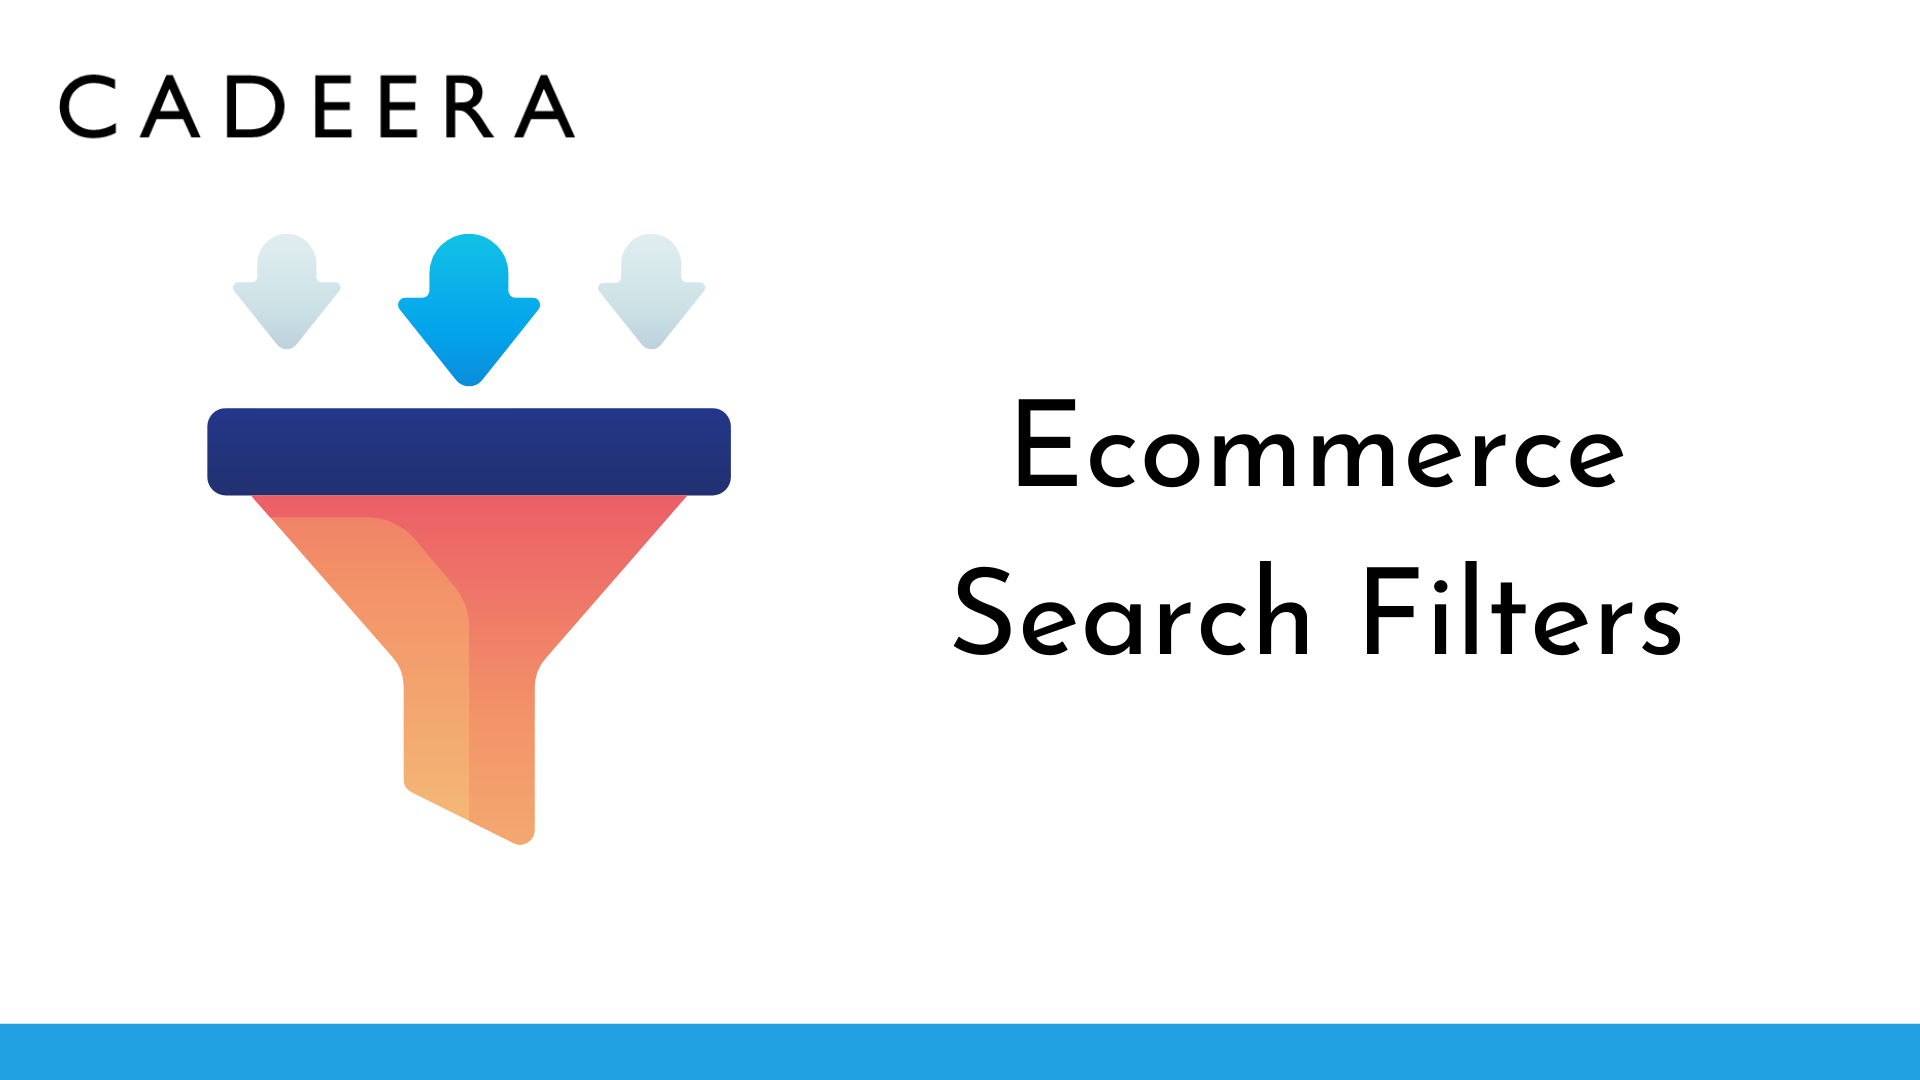 Ecommerce search filters